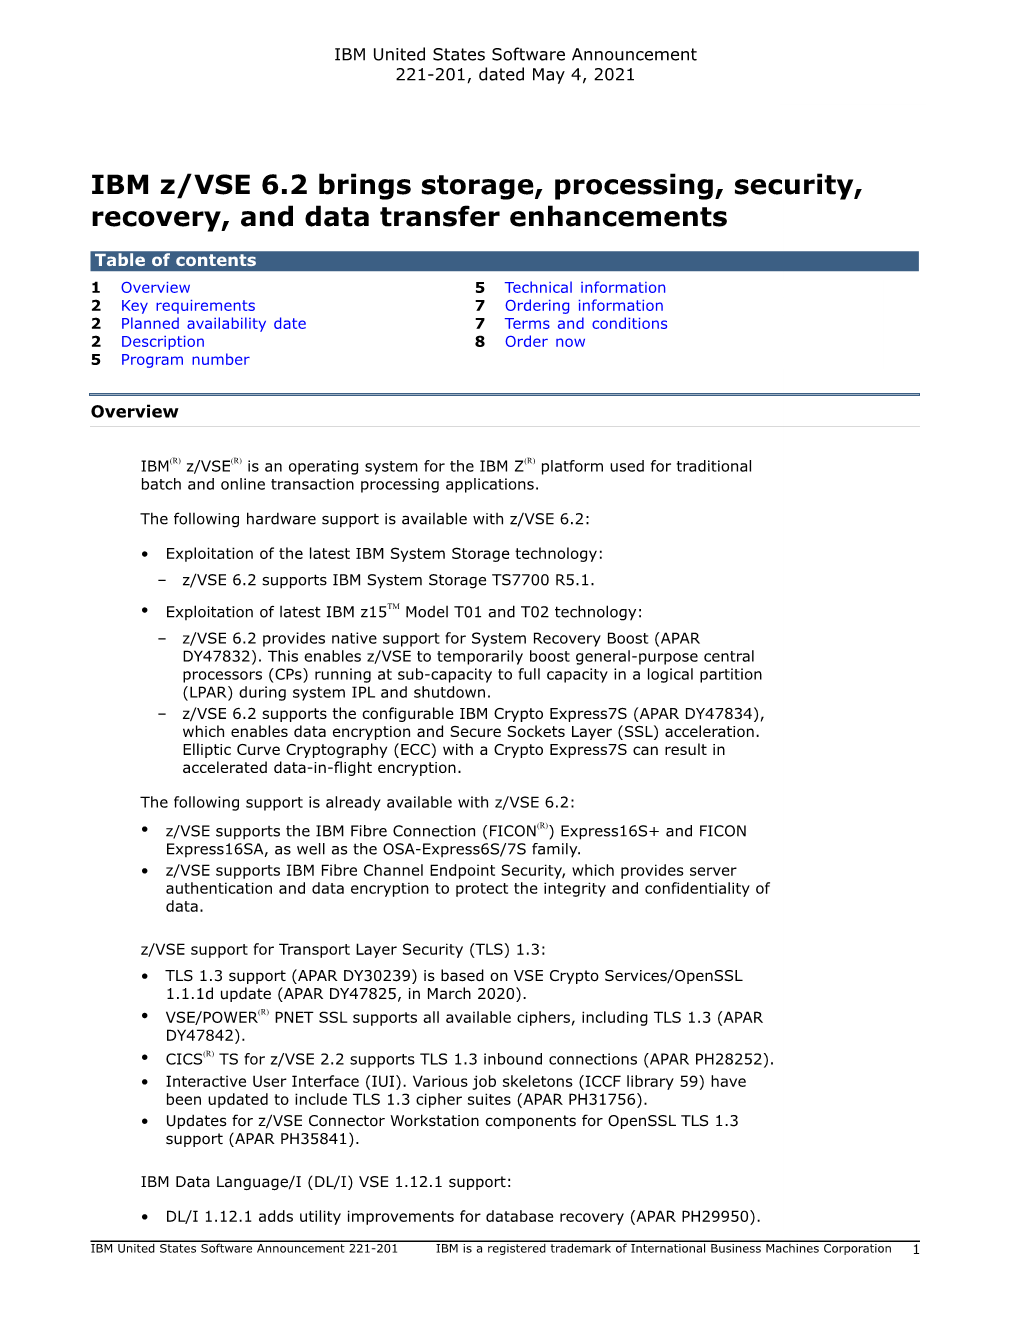 IBM Z/VSE 6.2 Brings Storage, Processing, Security, Recovery, and Data Transfer Enhancements